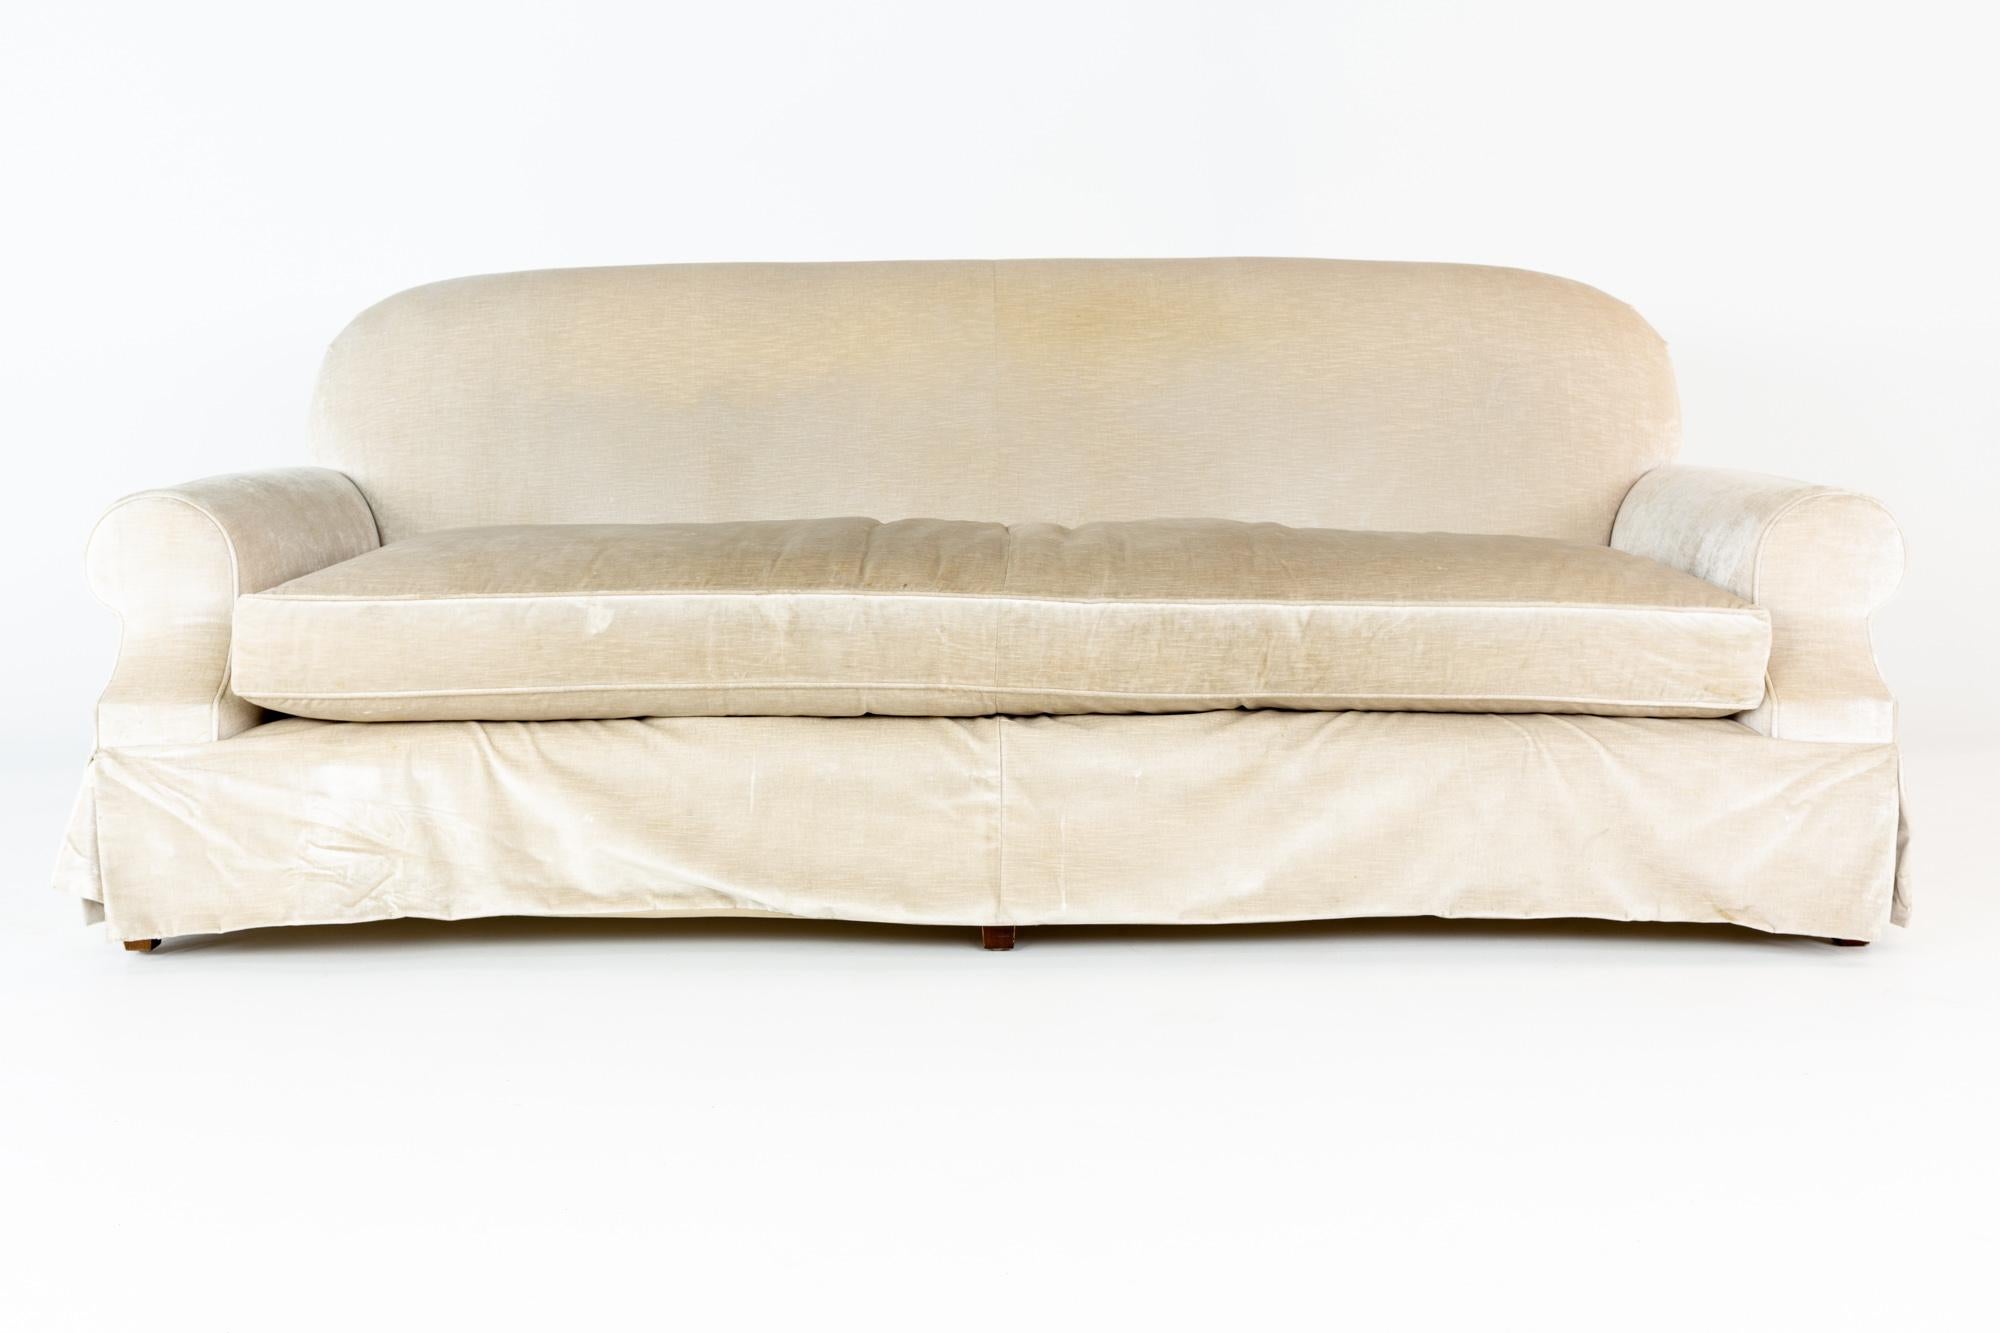 Swaim contemporary cream colored sofa in Mohair

This sofa measures: 96 wide x 52 deep x 37 inches high, with a seat height of 21.5 and arm height of 24 inches

About Photos: We take our photos in a controlled lighting studio to show as much detail